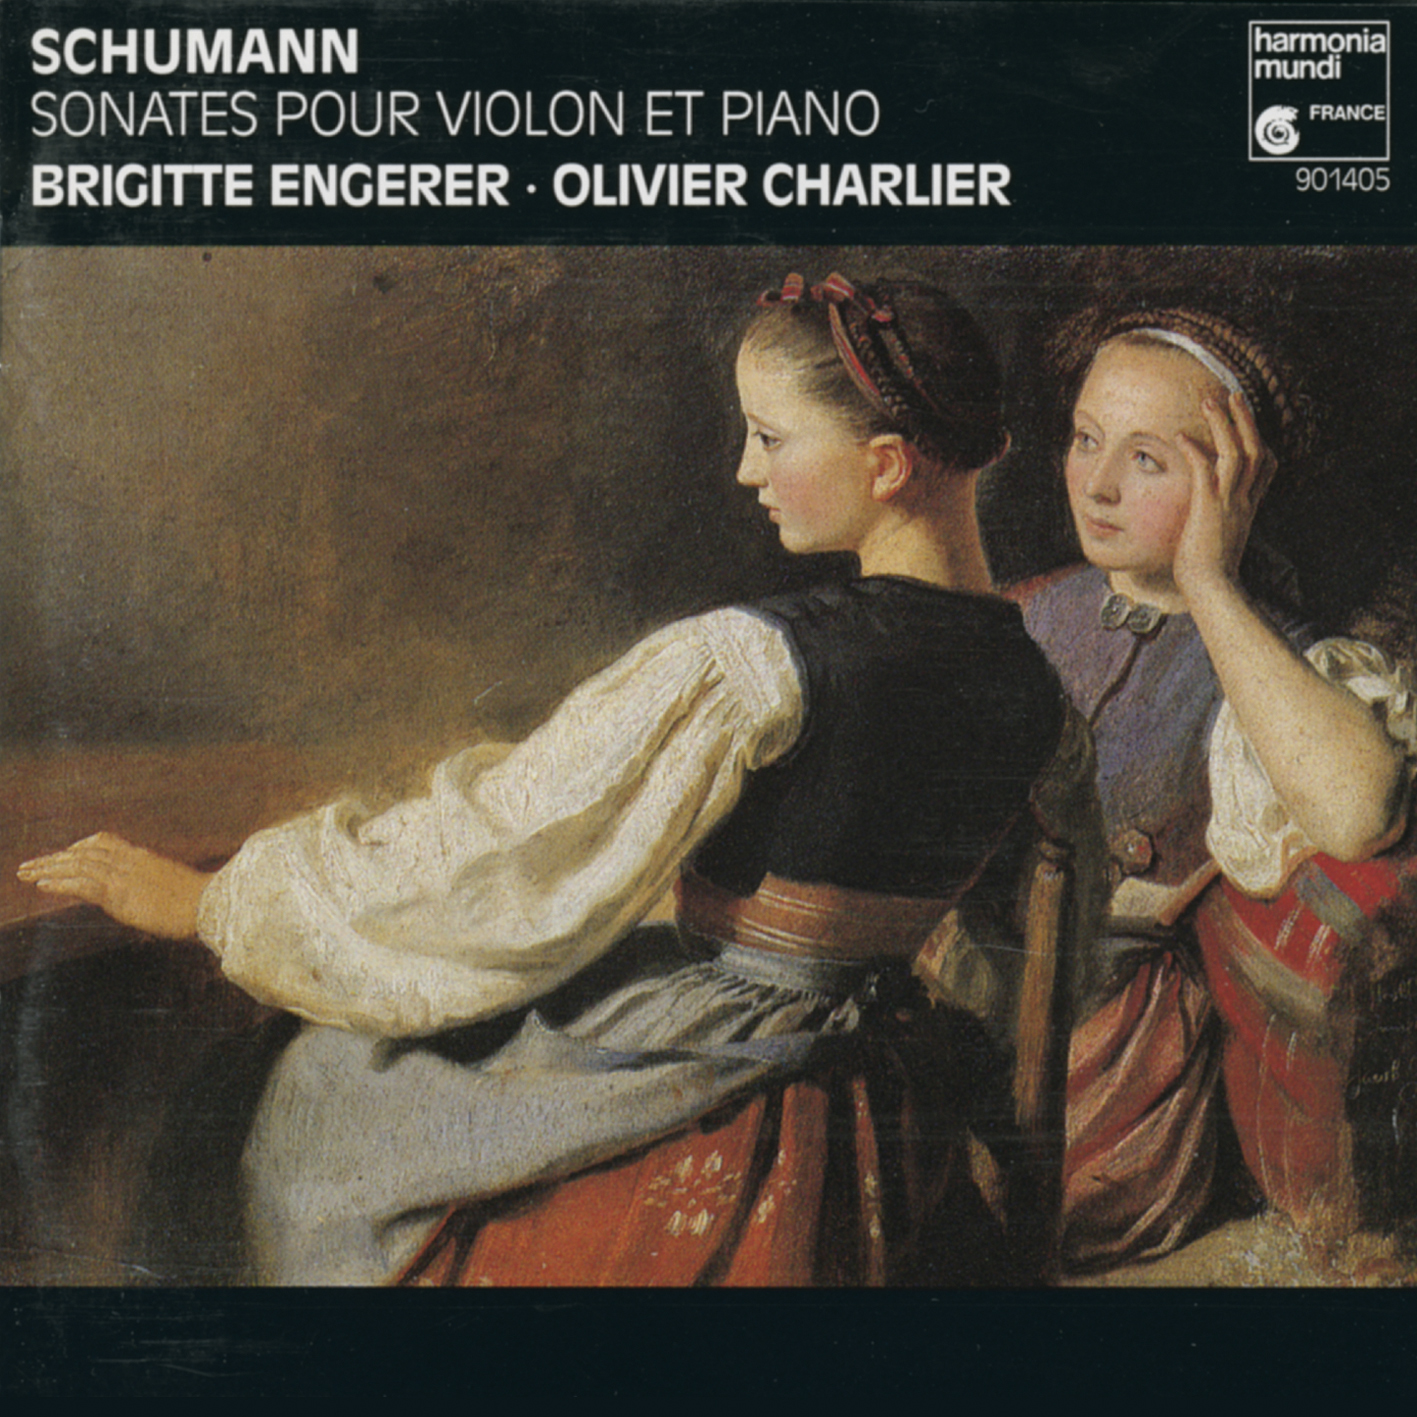 Three Romances for violin and piano, Op. 94: II. Einfach, innig. Etwas lebhafter